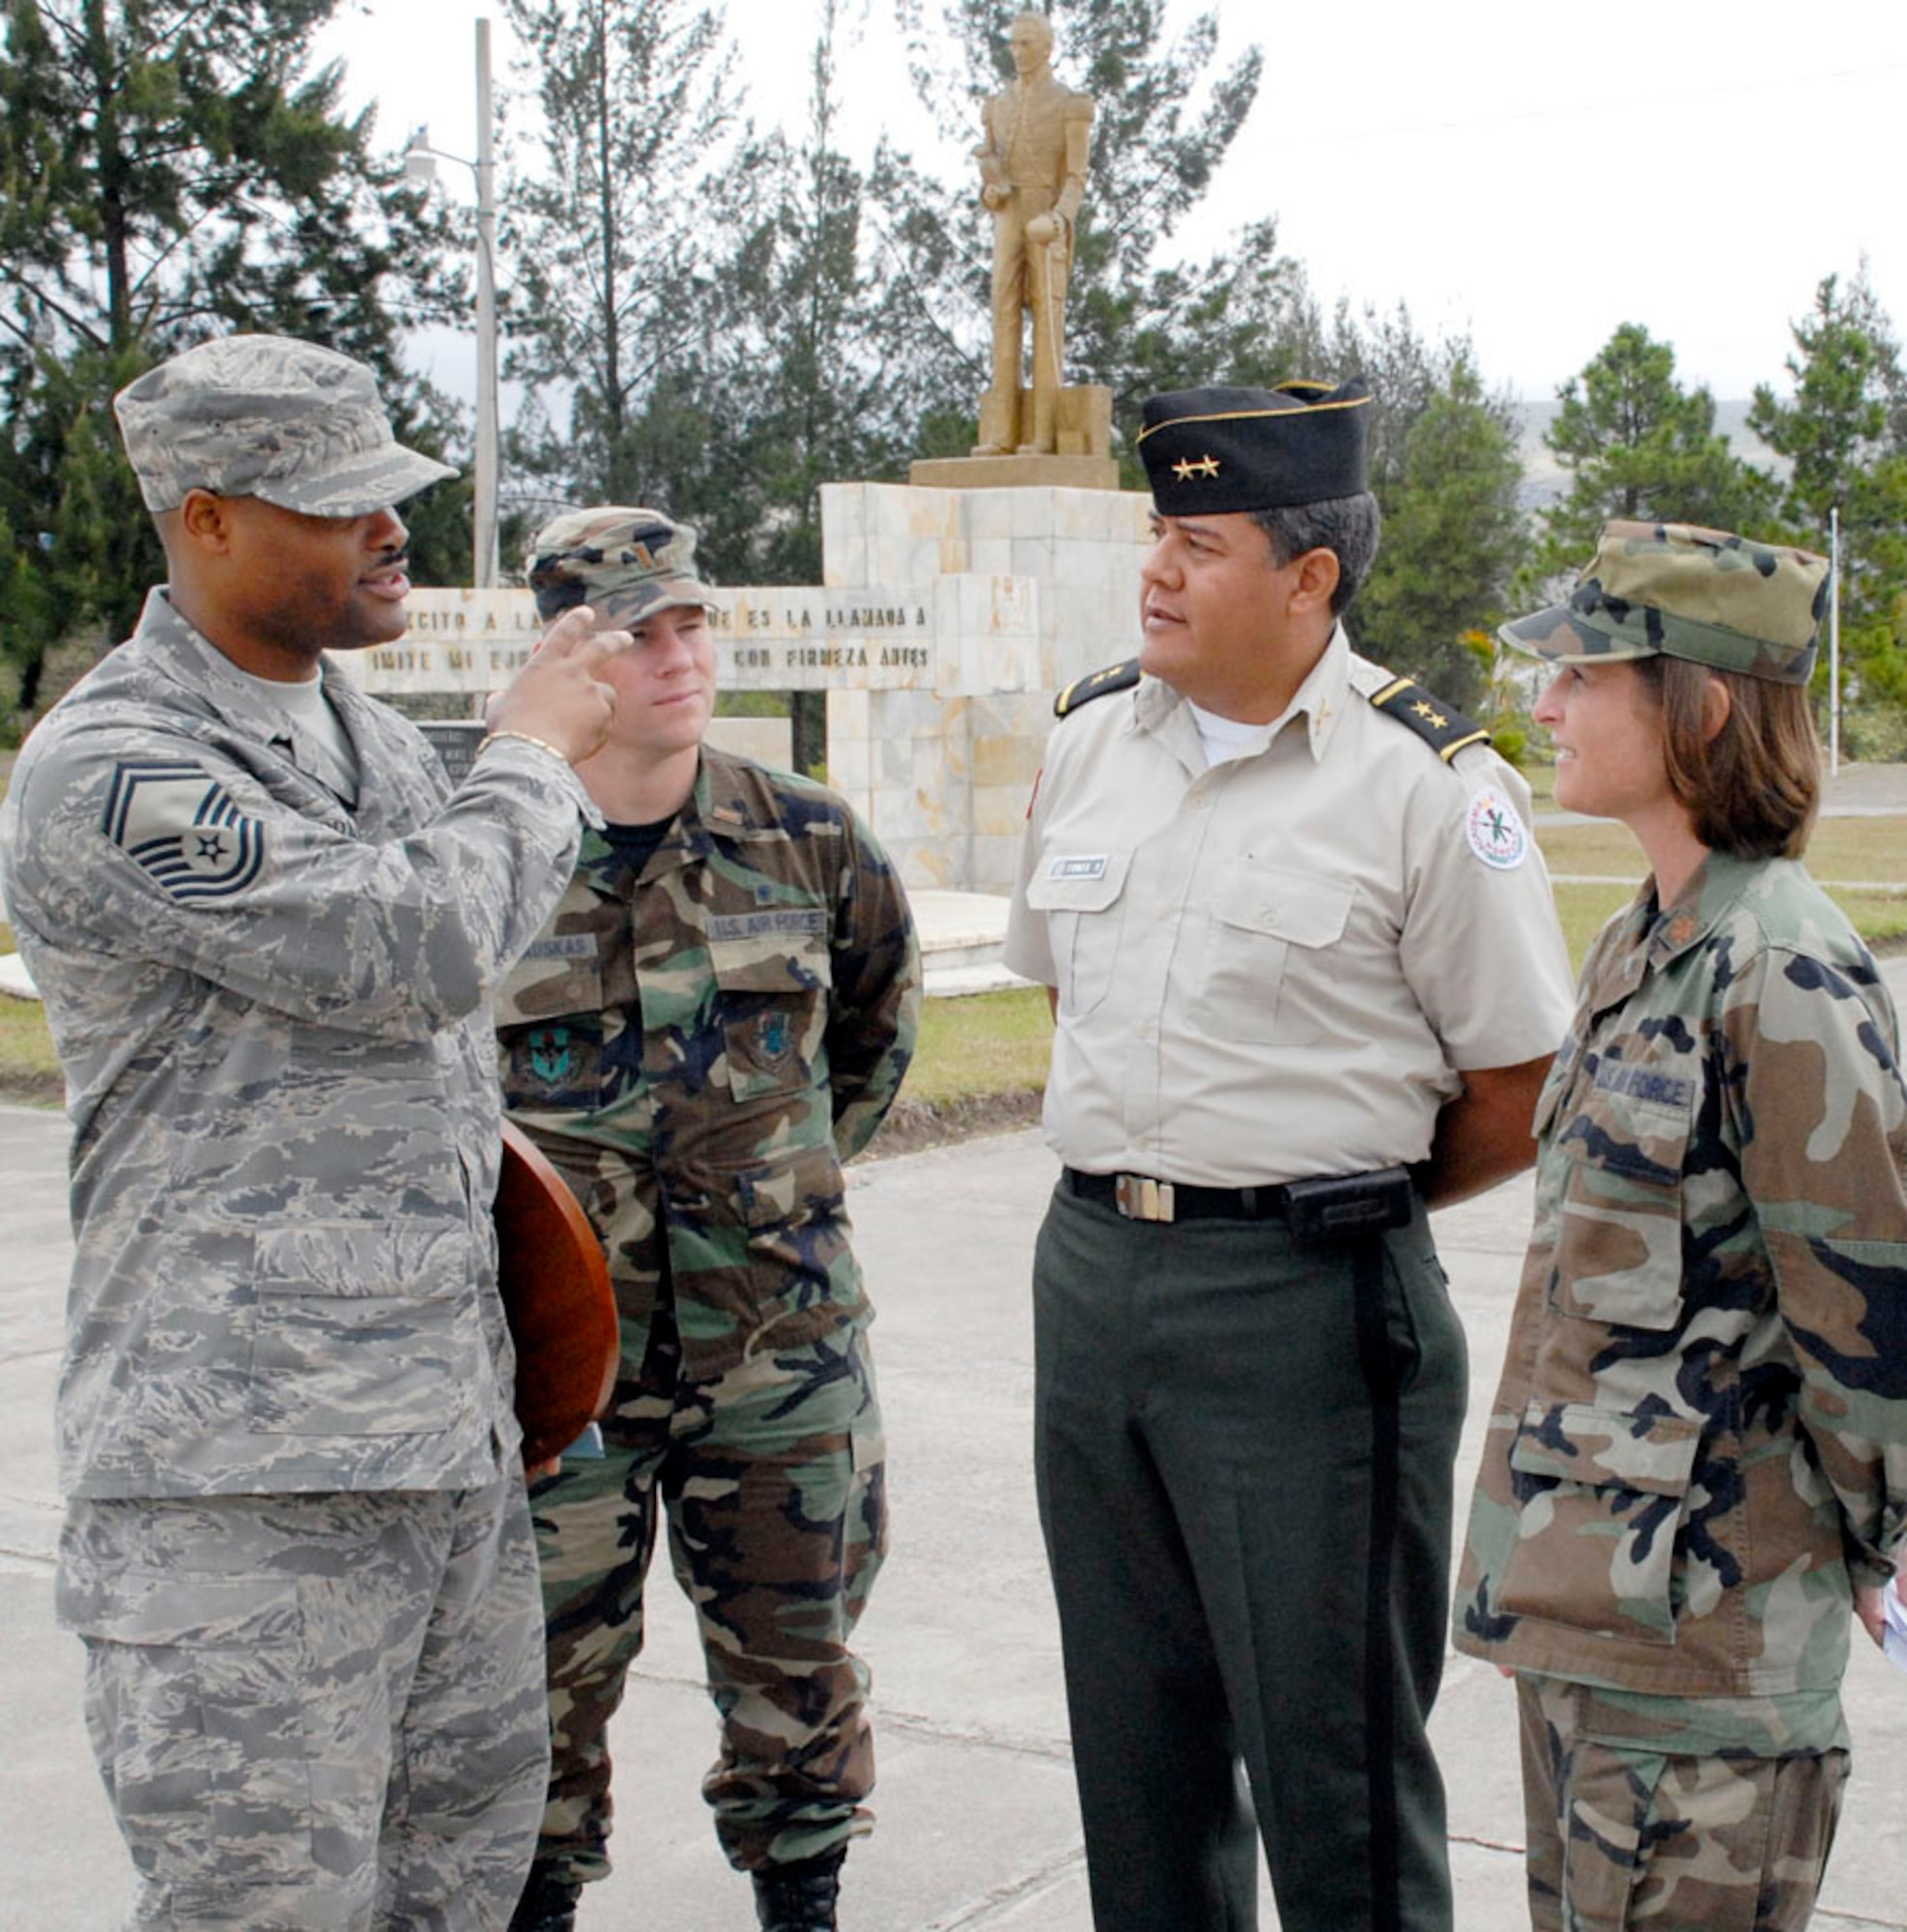 Senior Master Sgt. Les Bramlett, 2nd Lt. Zack Kalinauskis and Maj. Tiffany Morgan visit with Honduran Lt. Col. Raynel Funes during an information exchange and tour of the Honduran military training academy in Tegucigalpa, Honduras. Sergeant Bramlet, Lieutenant Kalinauskis and Major Morgan are members of Joint Task Force-Bravo from Soto Cano Air Base, Honduras. Colonel Fuenes is the Honduran Military Training Academy deputy director. (U.S. Air Force photo/Tech. Sgt. William Farrow) 